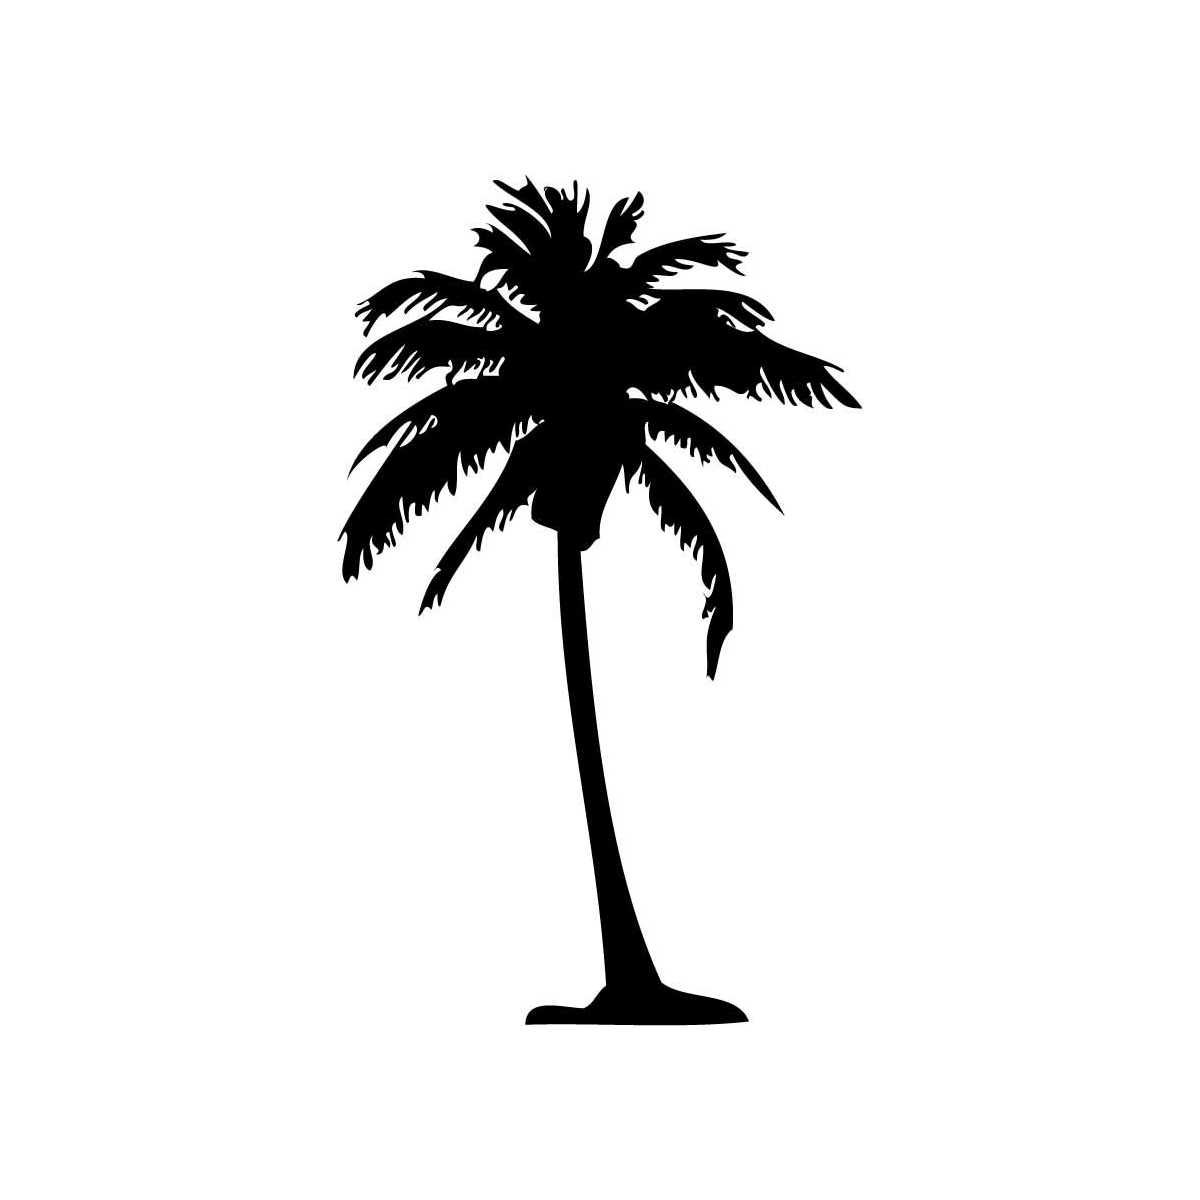 Palm Tree Pics, Earth Collection